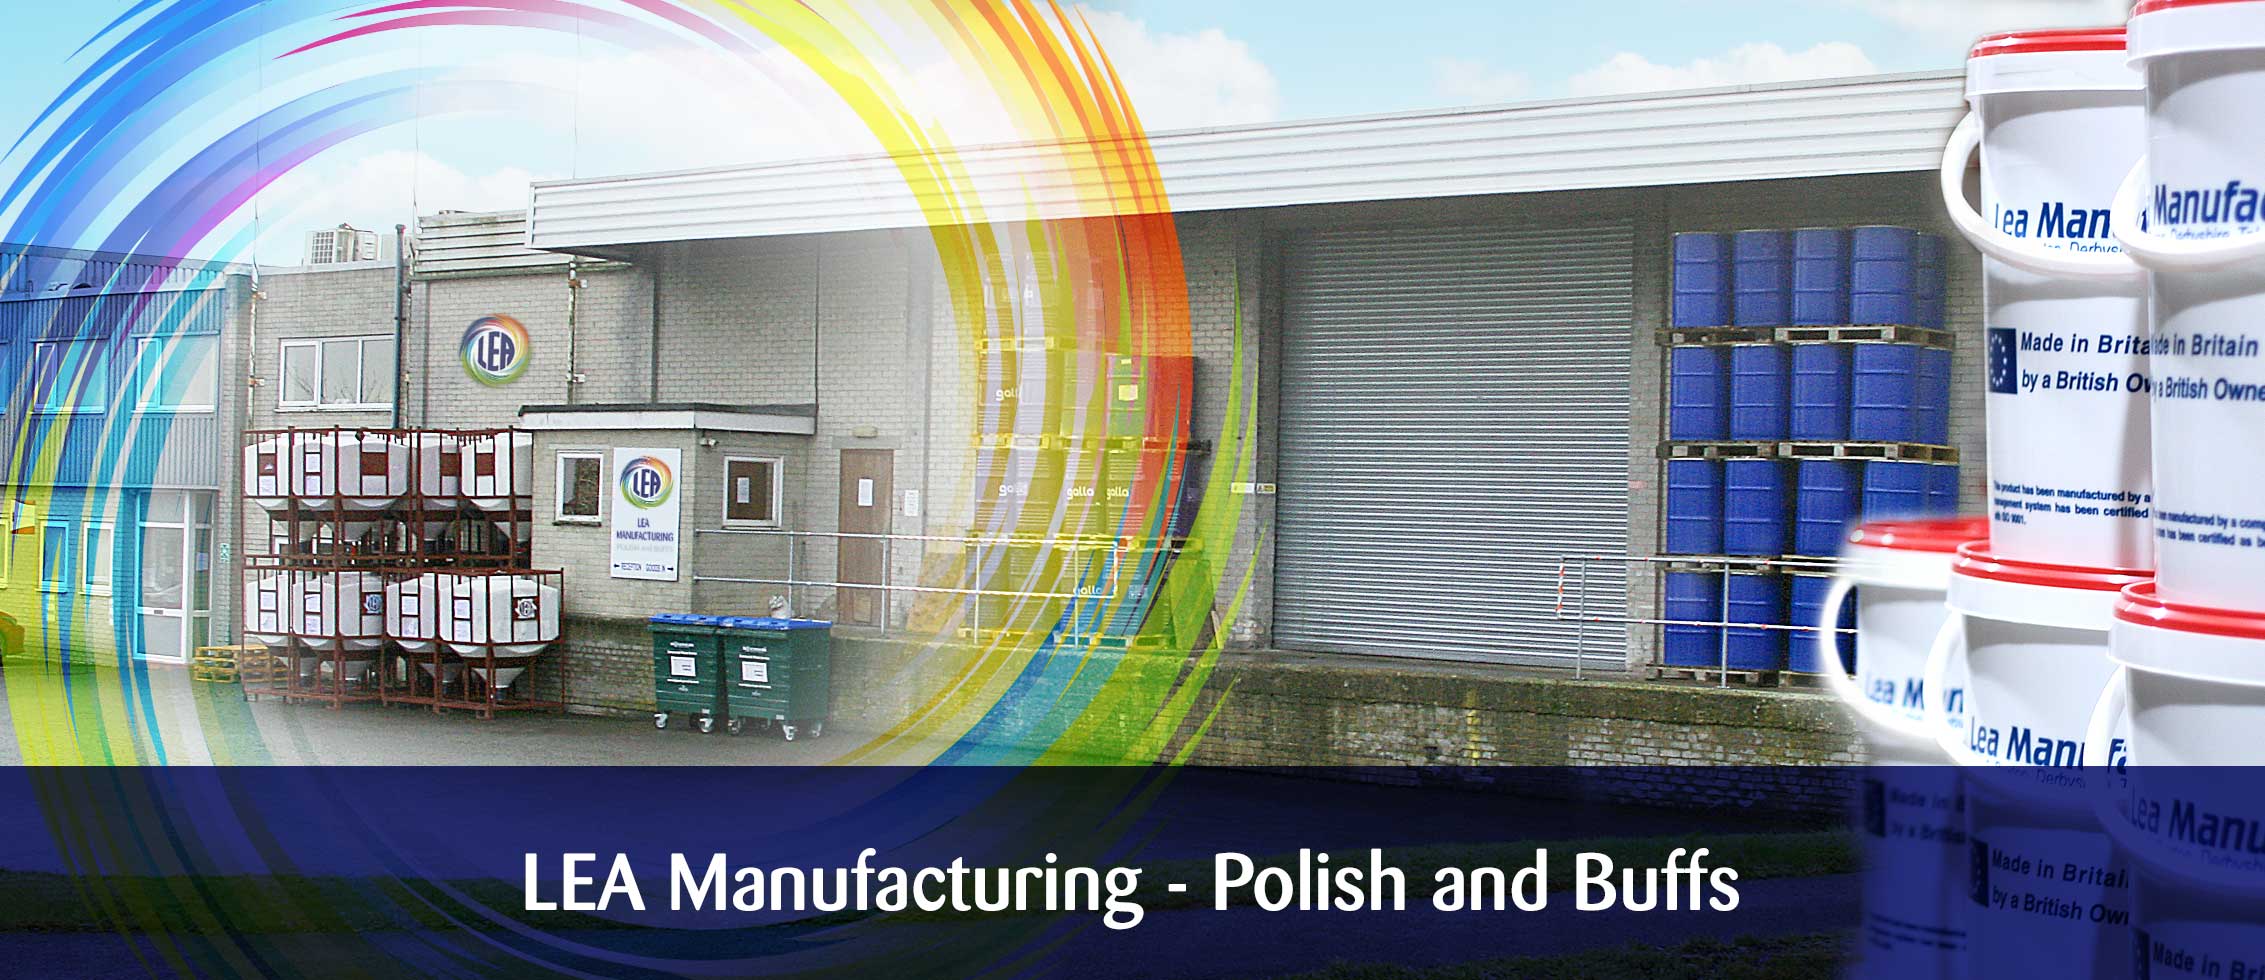 LEA Manufacturing - Polish and Buffs - Terms and Conditions